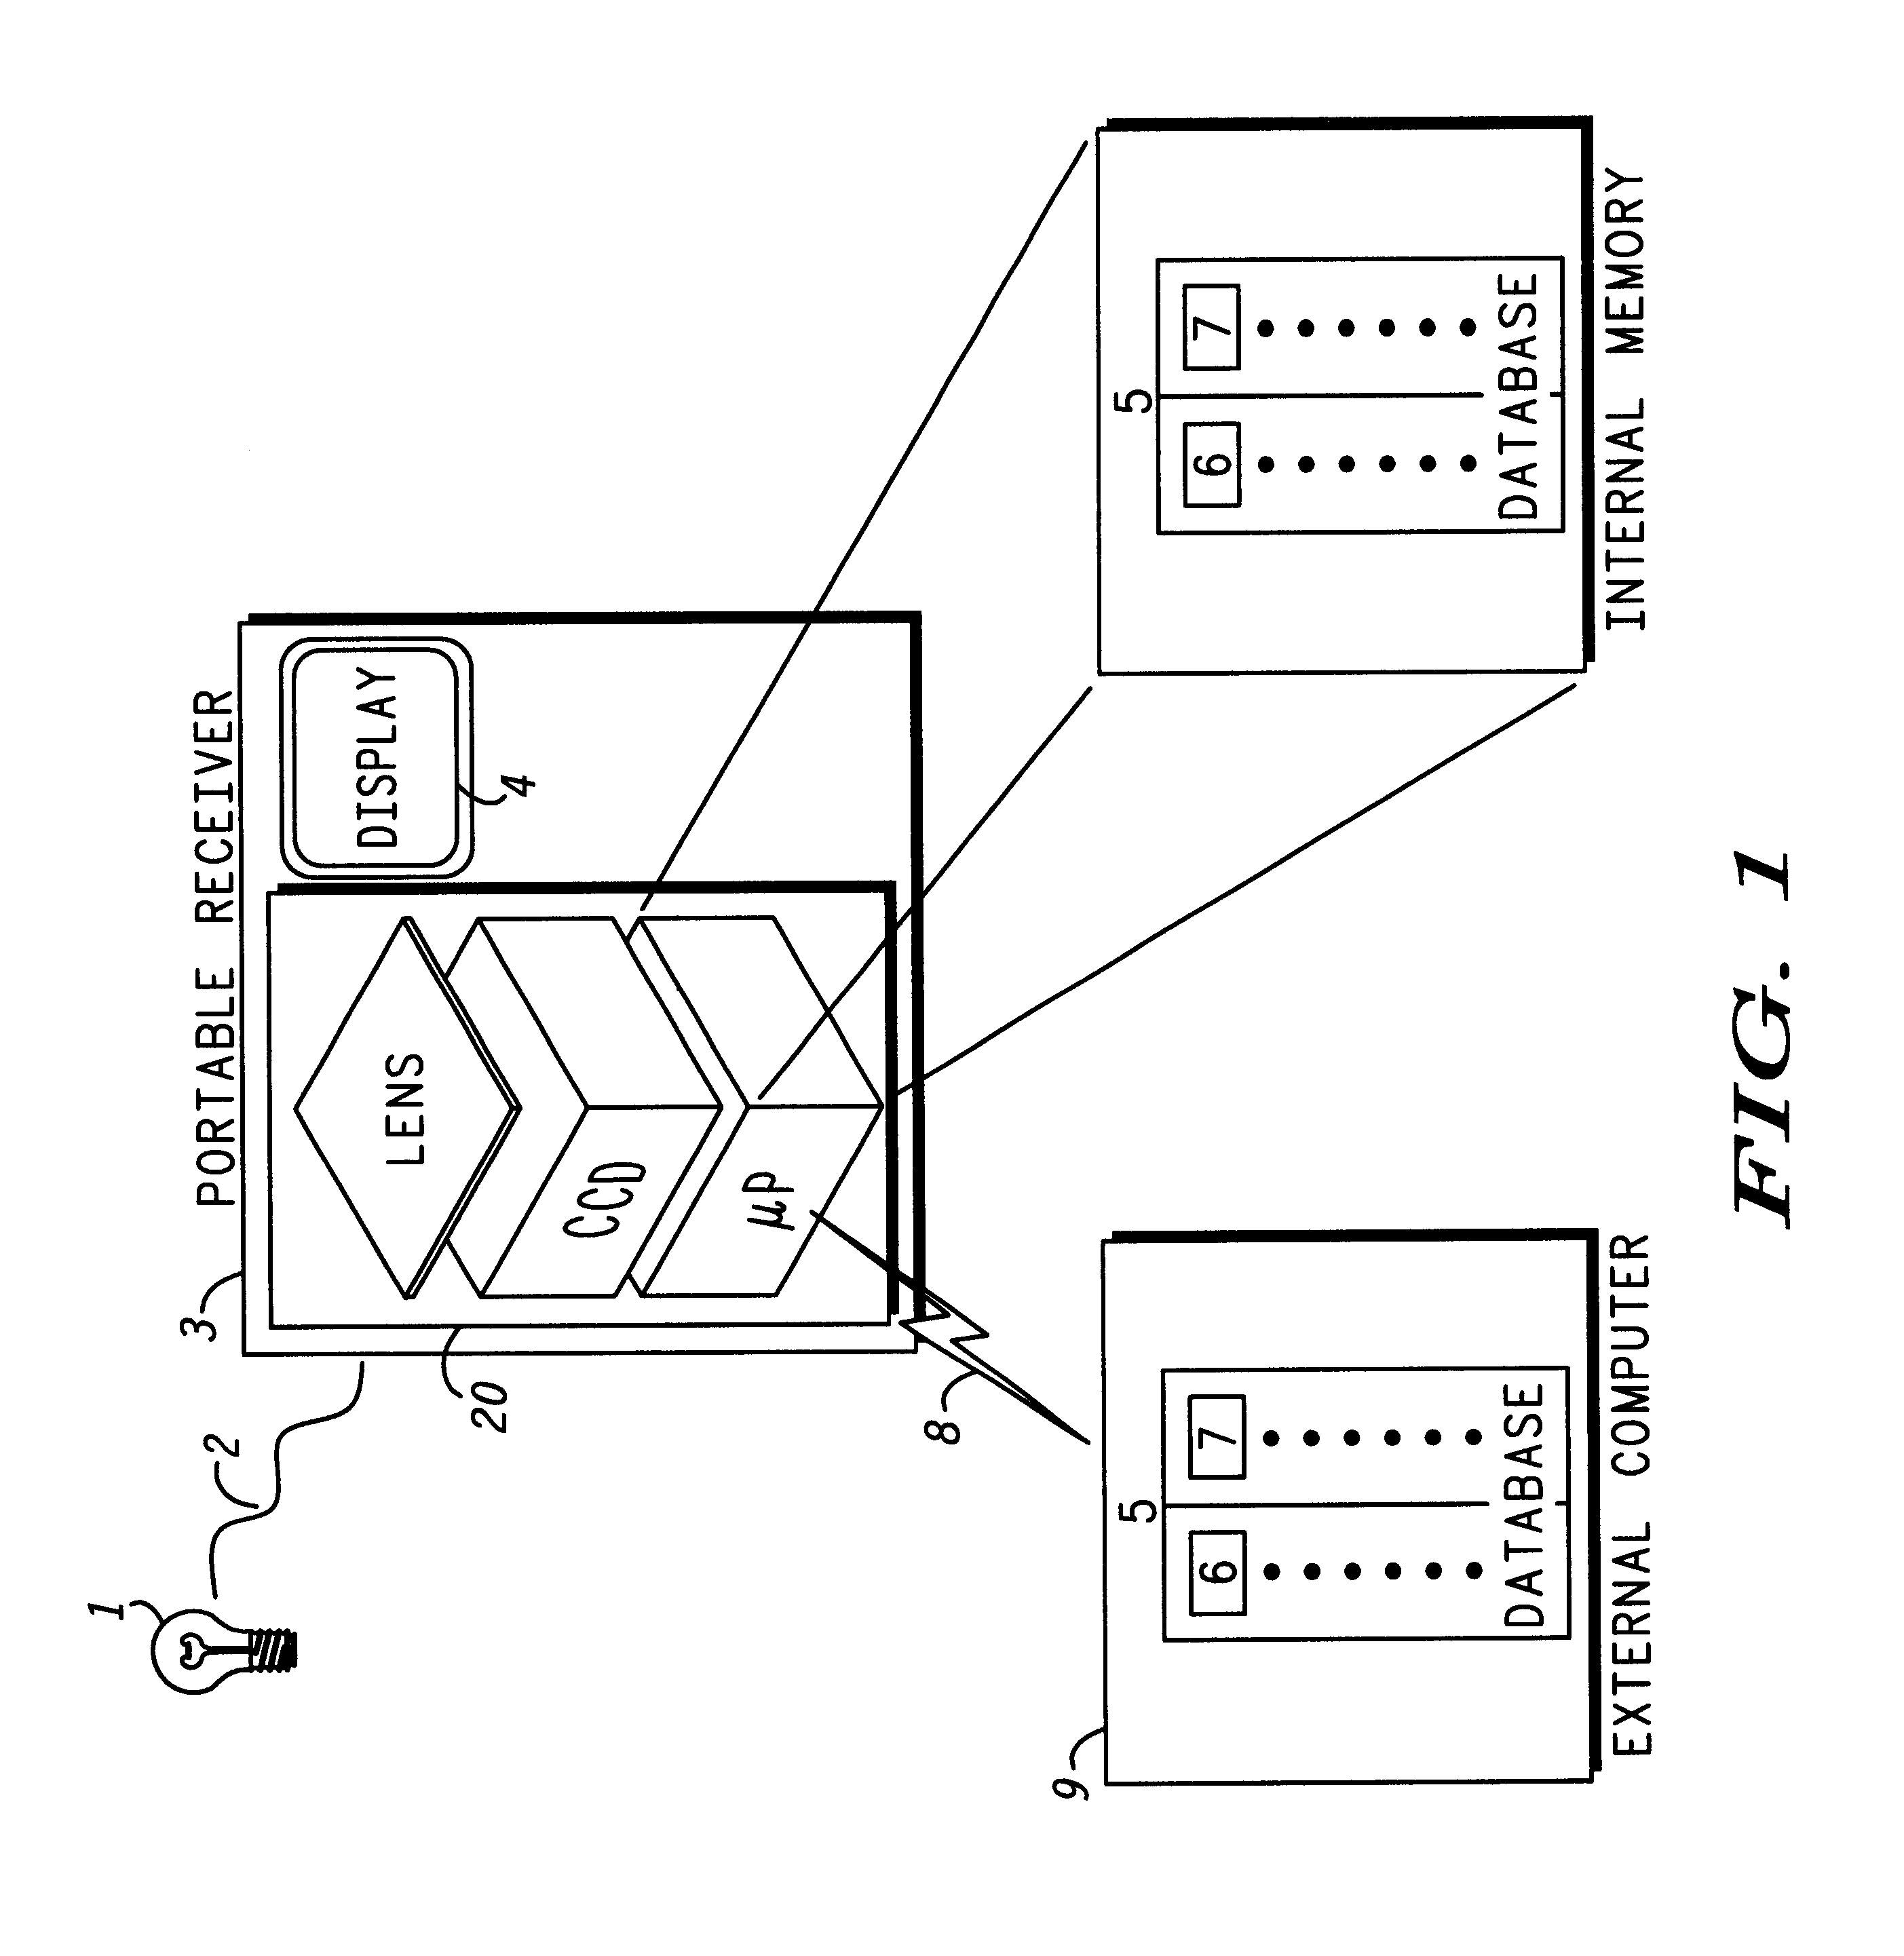 Optically-based location system and method for determining a location at a structure